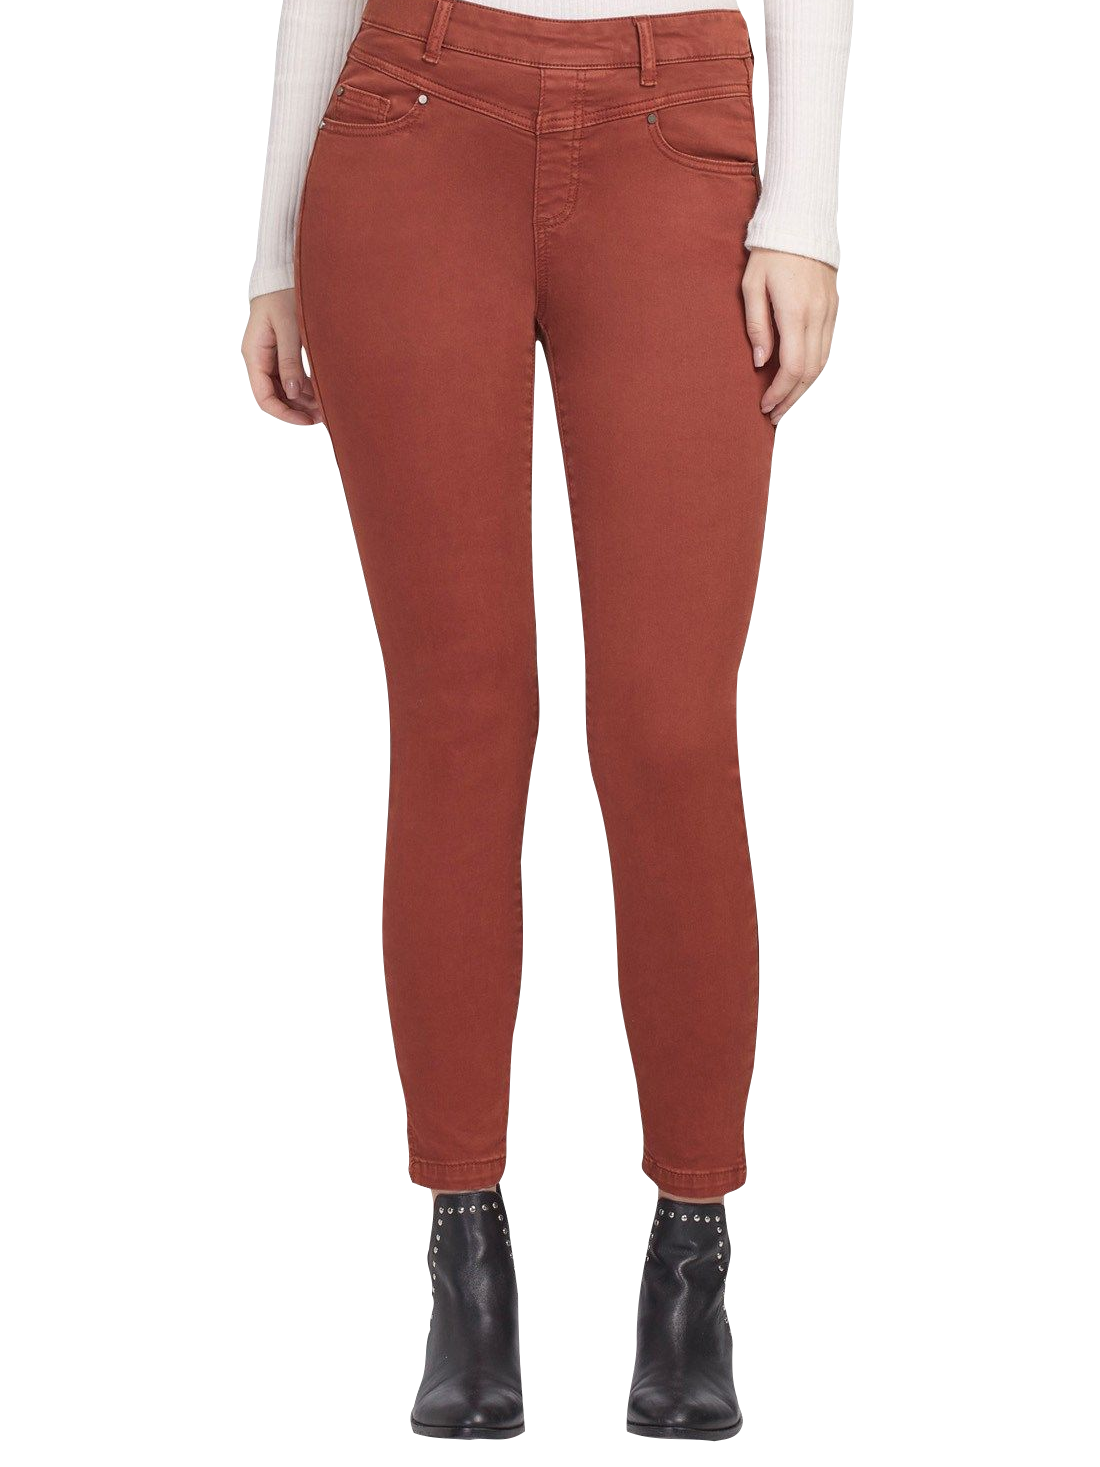 Tribal Pull-On Twill Ankle Jegging in Tawny color